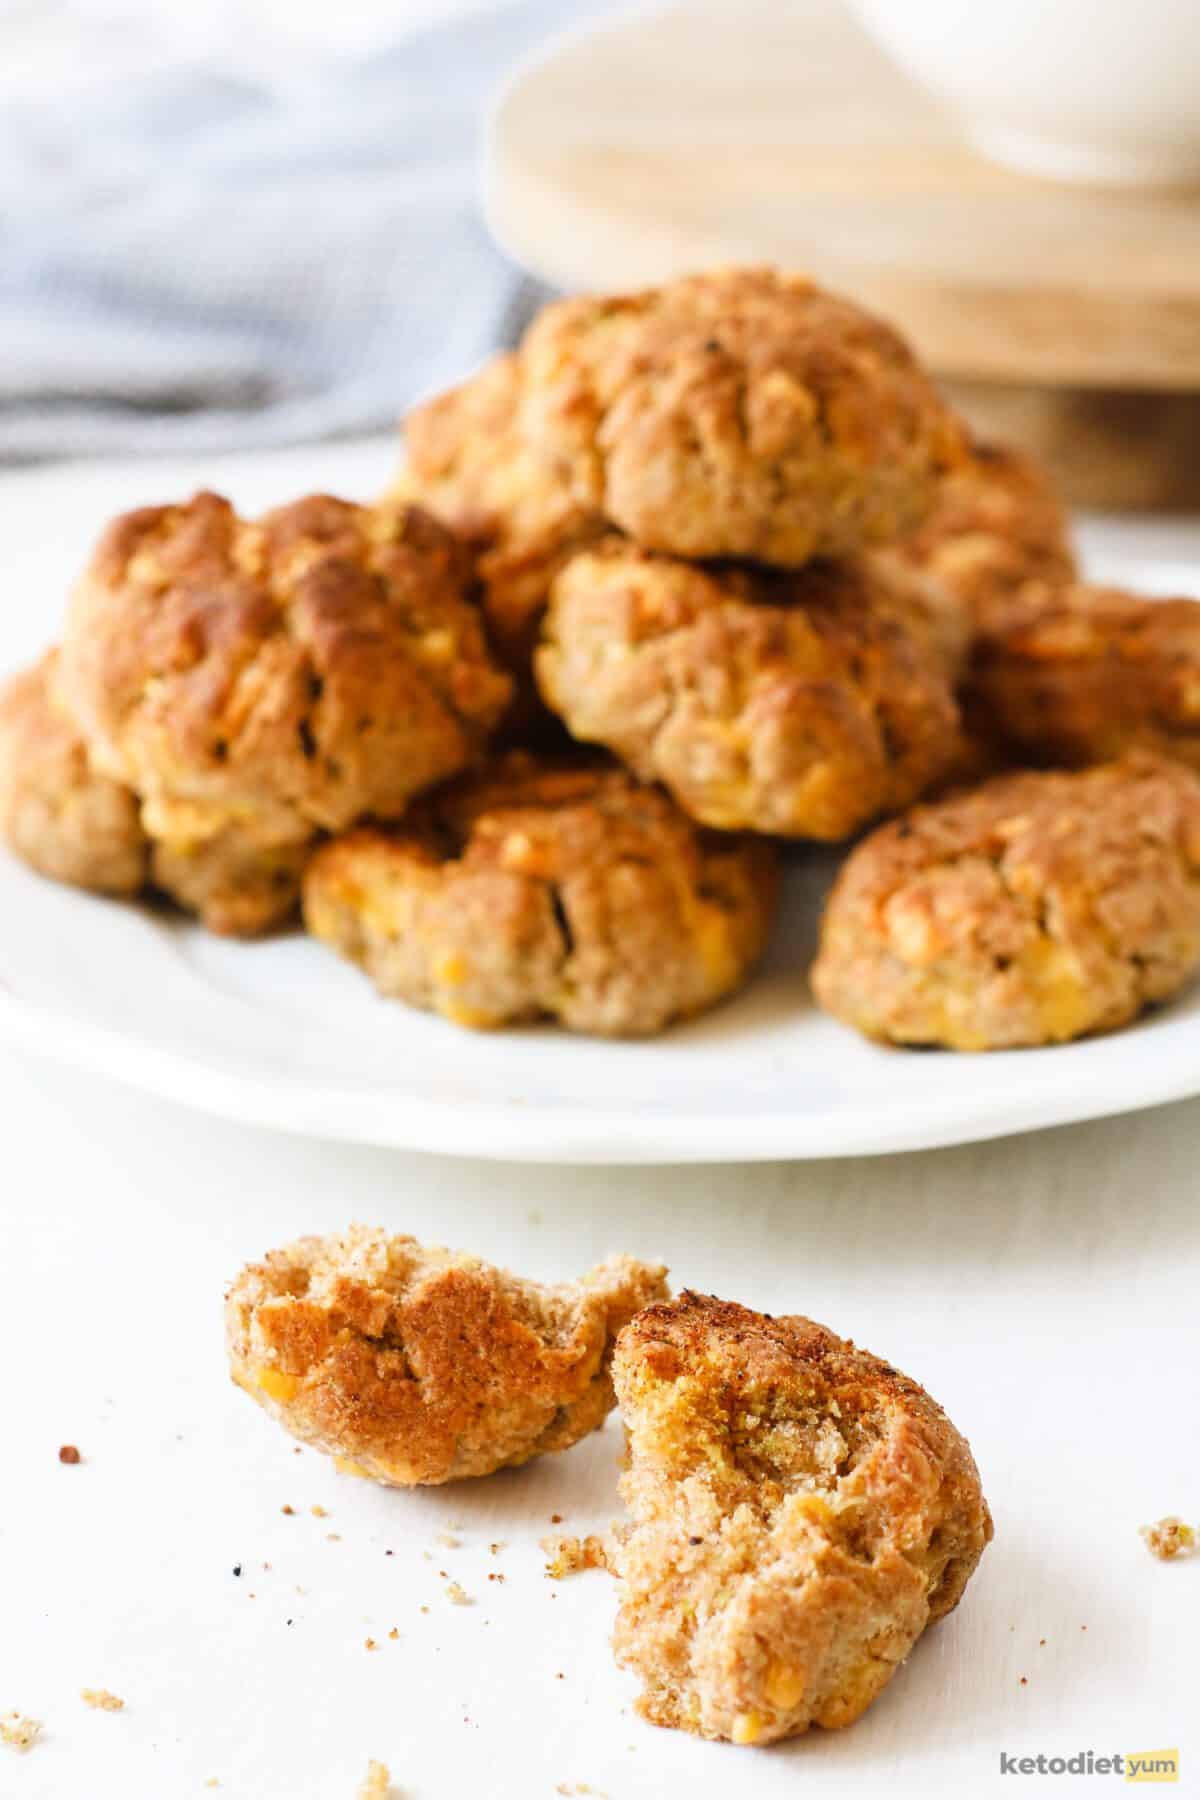 Crispy golden keto cheddar biscuits with a melt in your mouth cheesy inside ready to enjoy